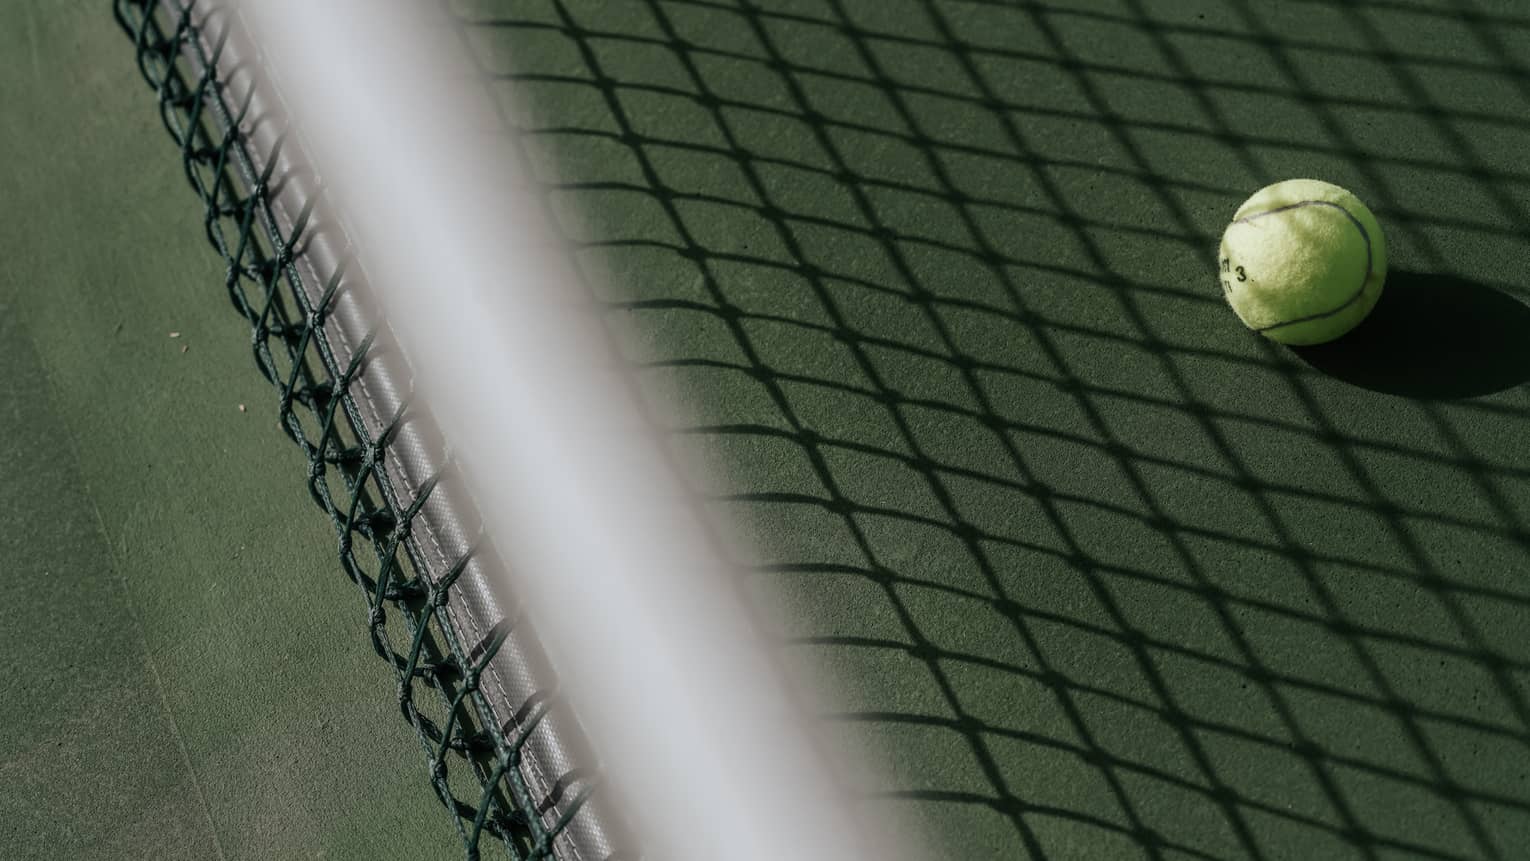 Tennis ball on tennis court with shadow of net